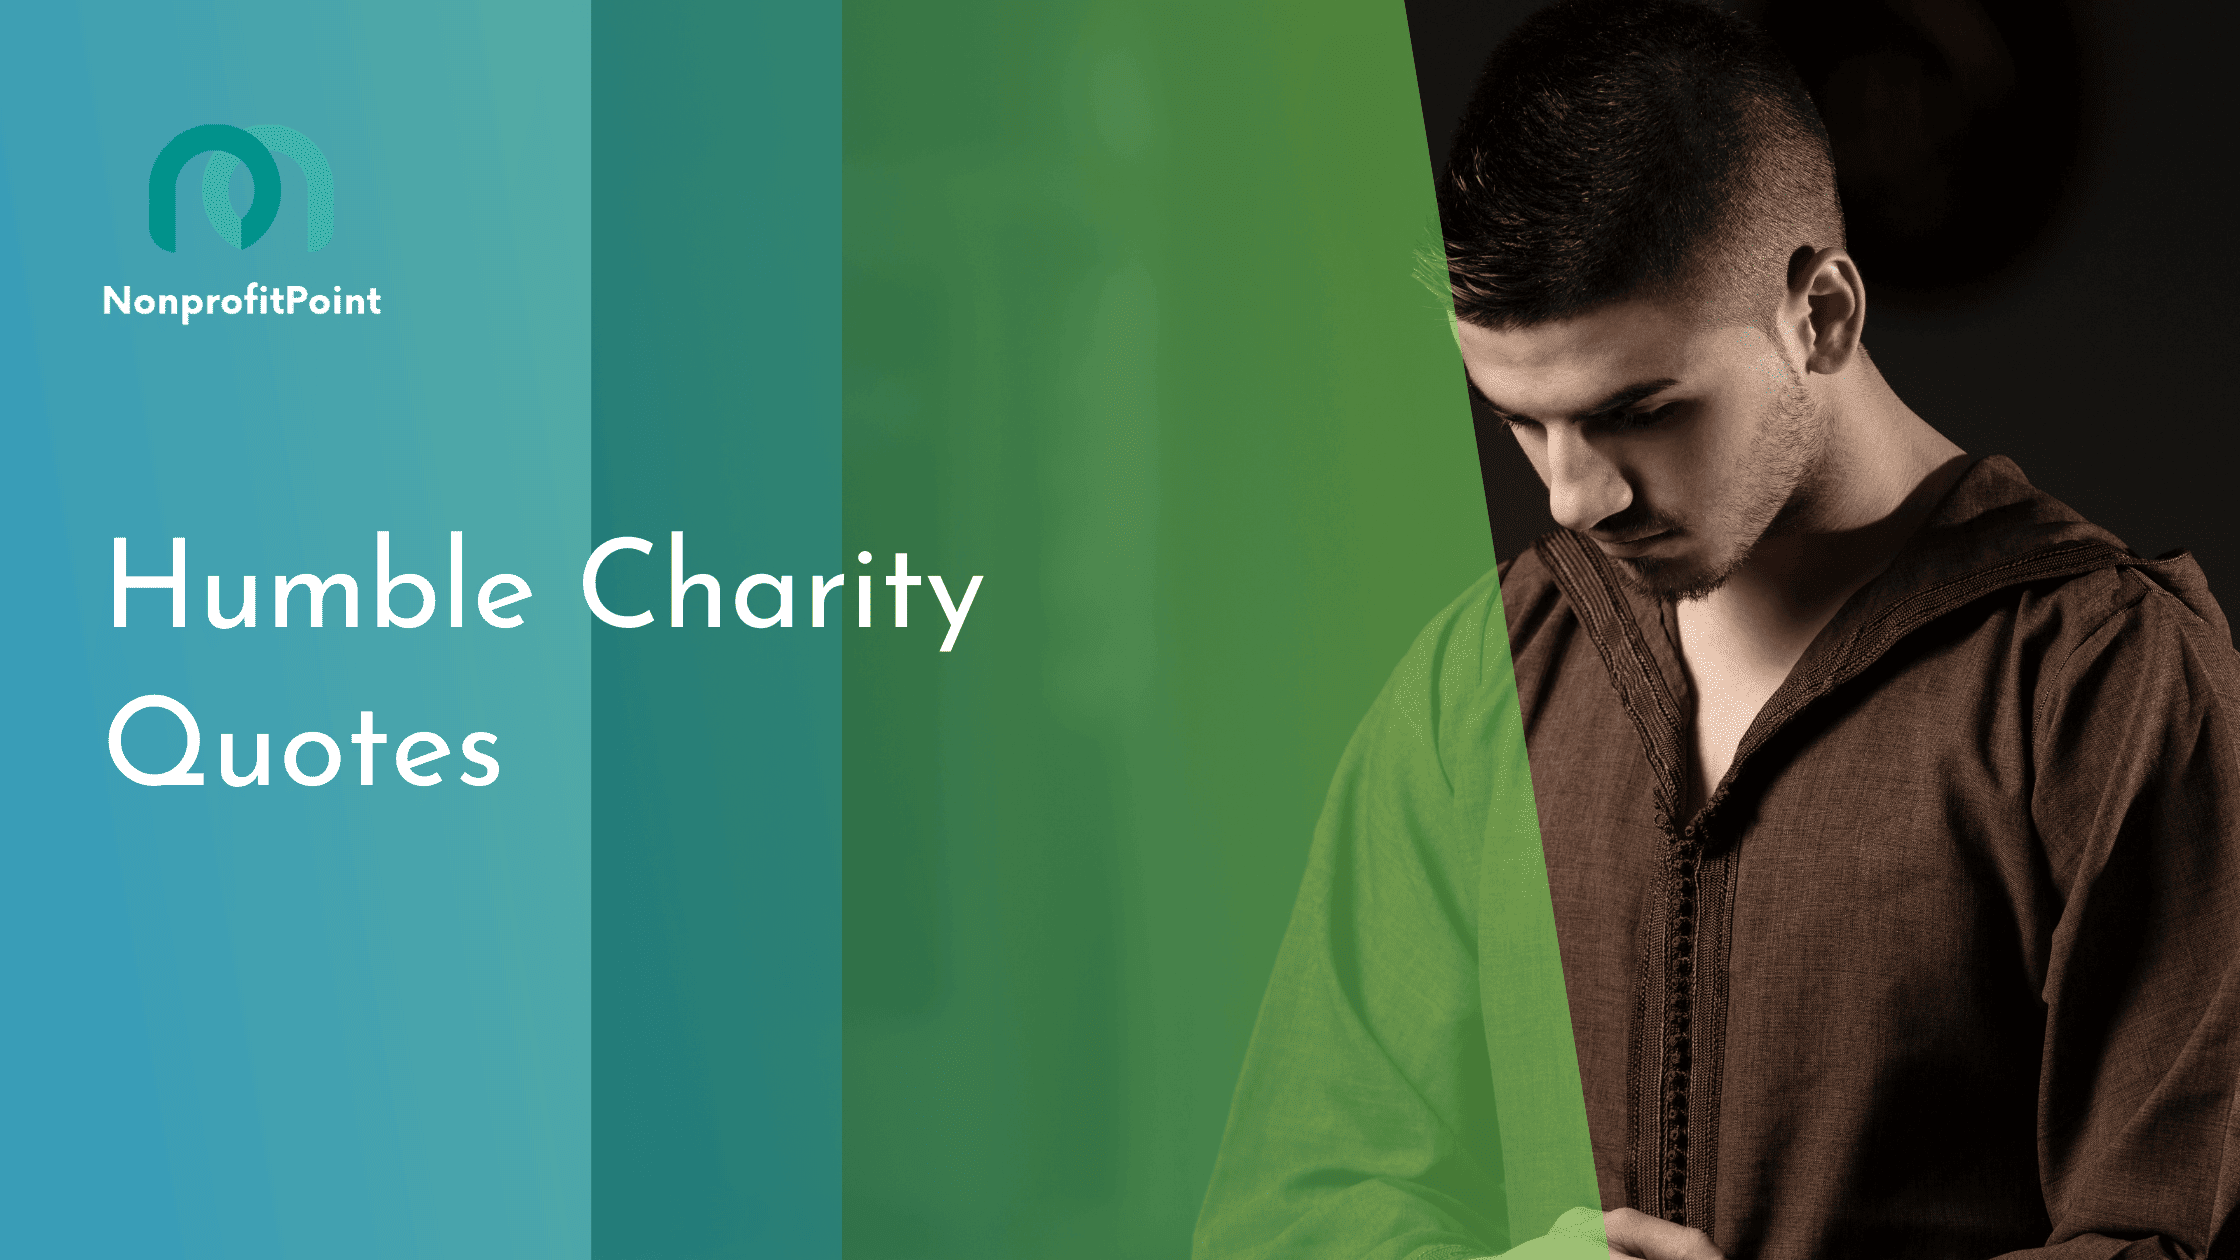 Humble Charity Quotes